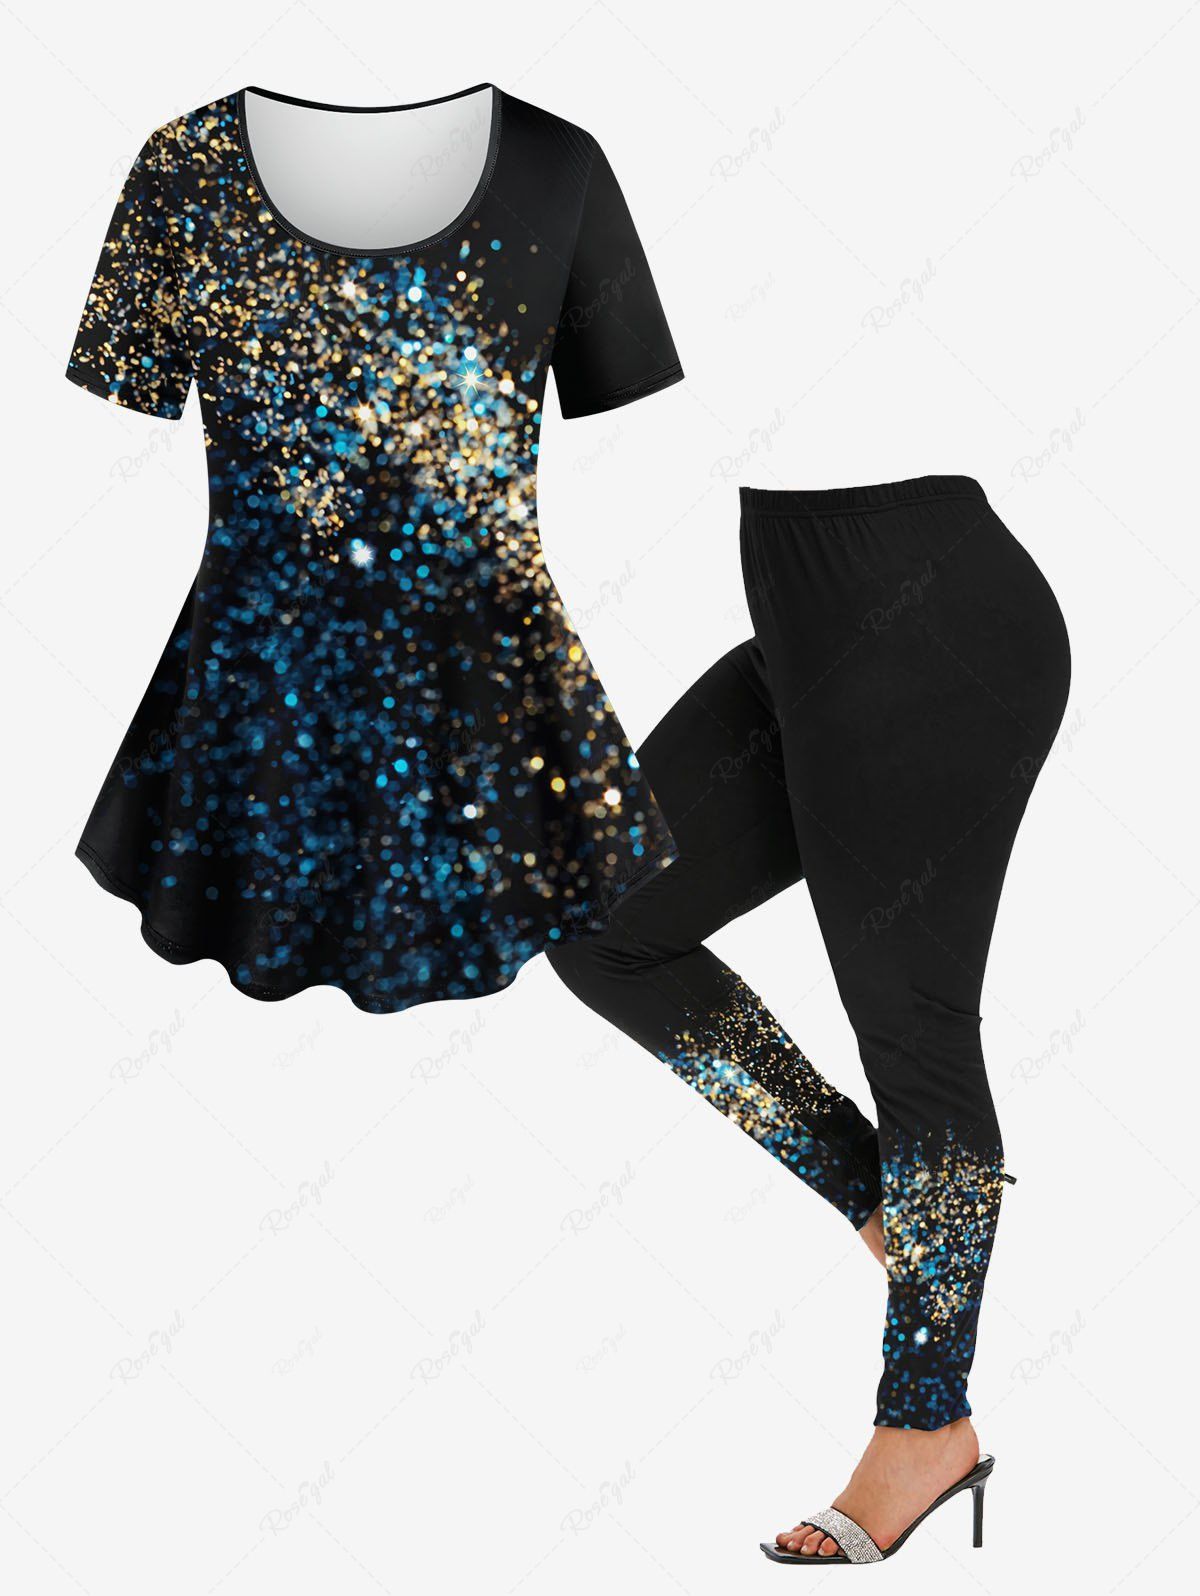 Sale Sparkling Sequin Glitter 3D Printed T-shirt and Leggings Plus Size Matching Set  